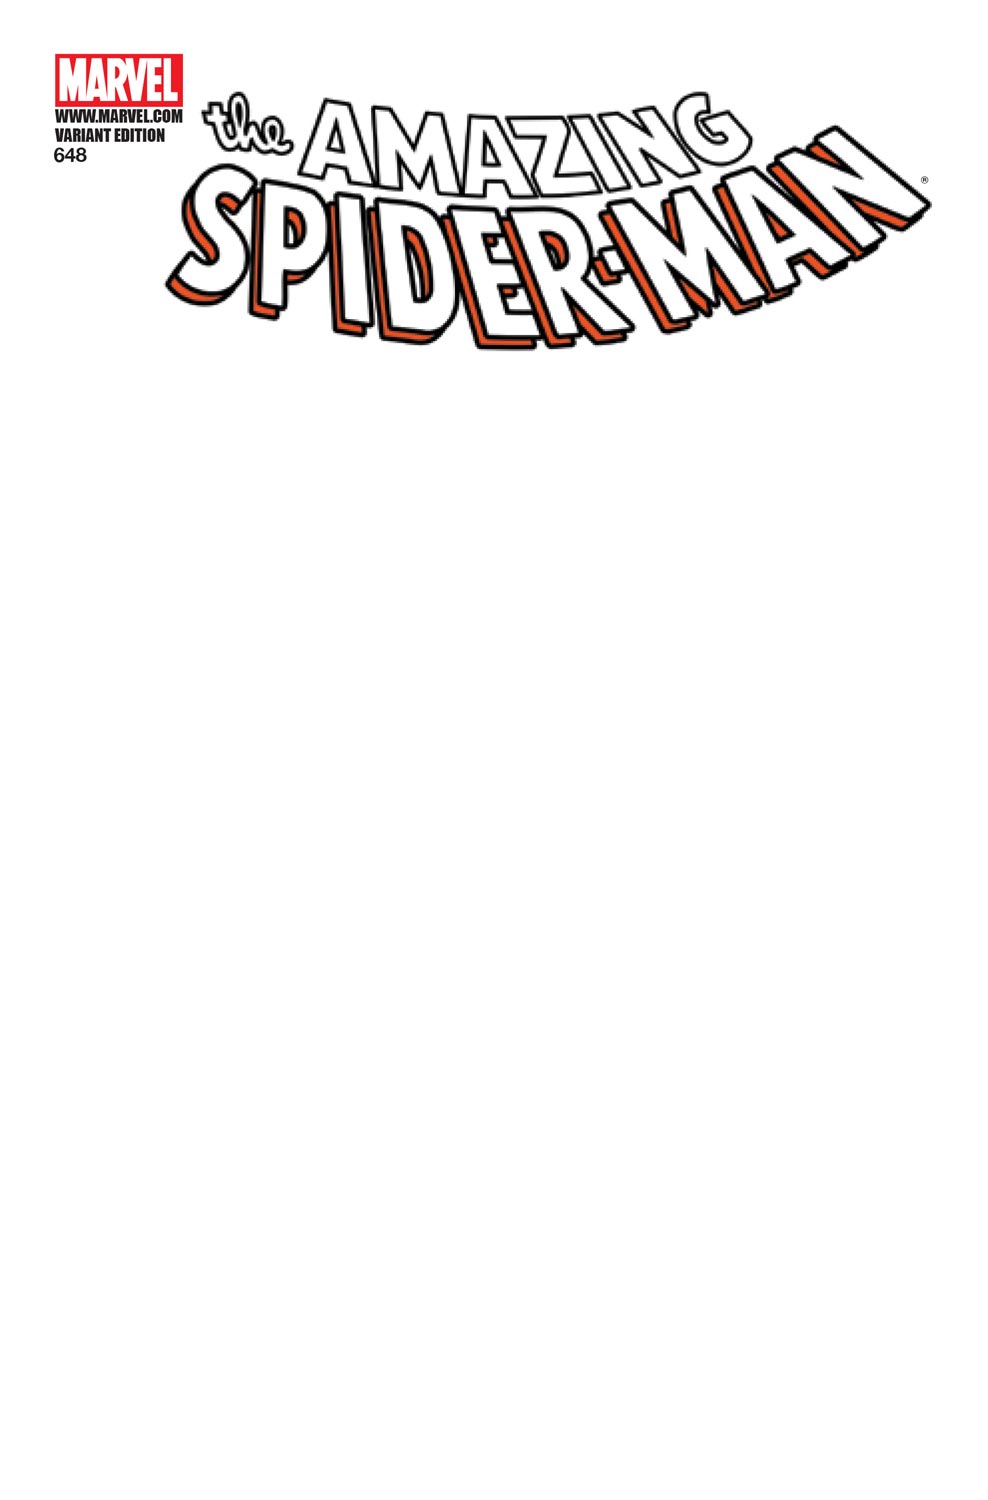 Amazing Spider-Man (1999) #648 (BLANK COVER VARIANT)